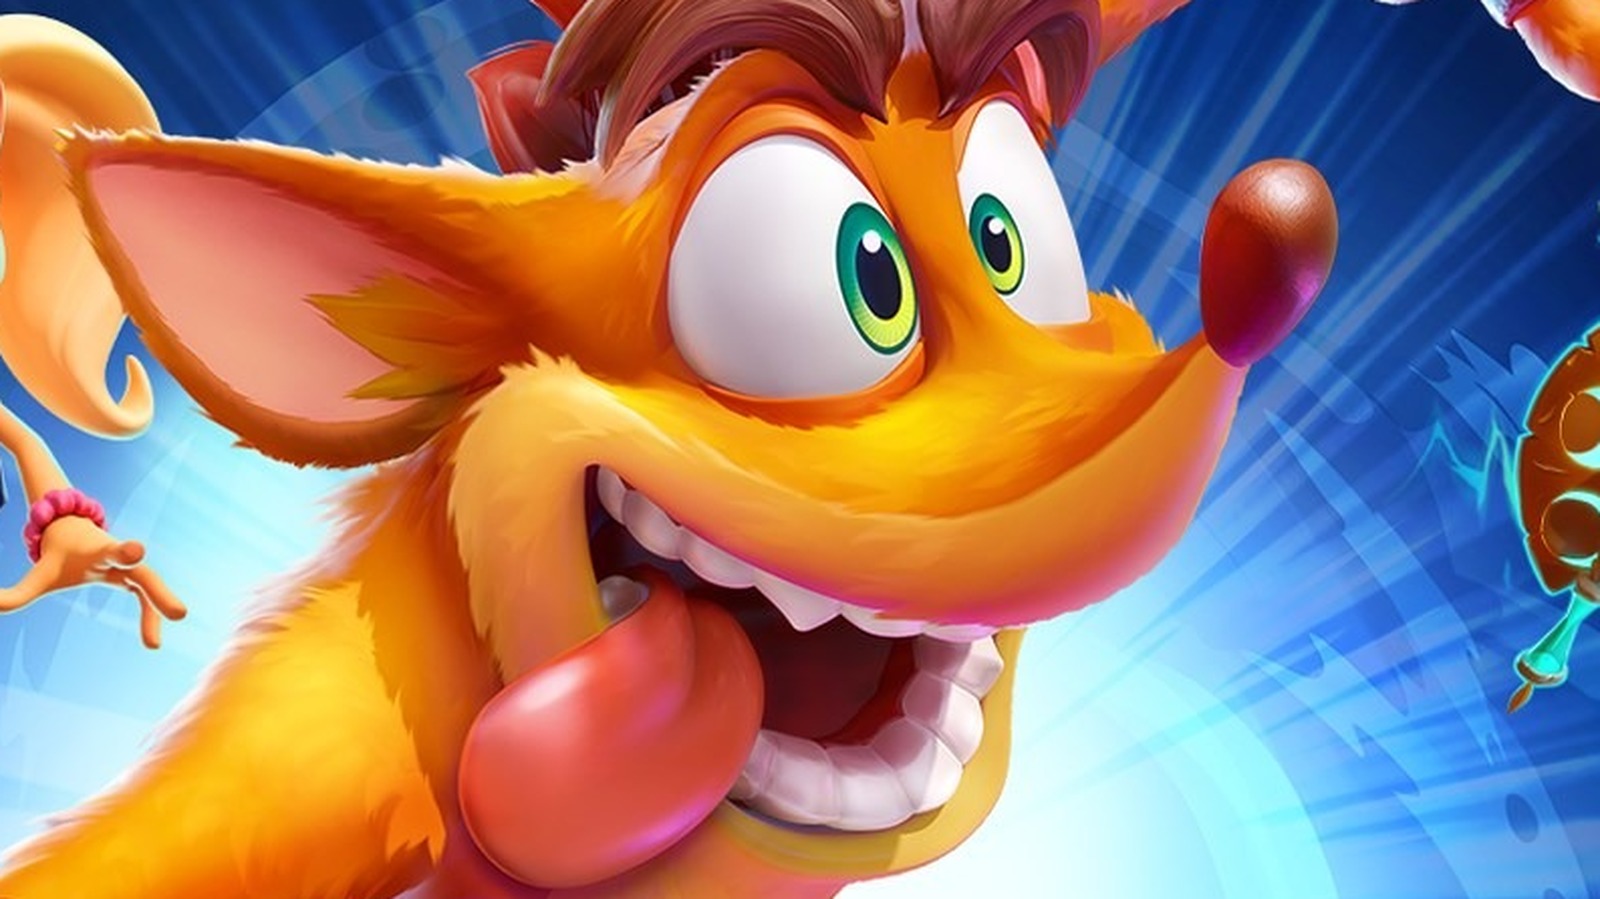 Crash Bandicoot 4 coming to PS5, Xbox Series X, and Nintendo Switch this  March